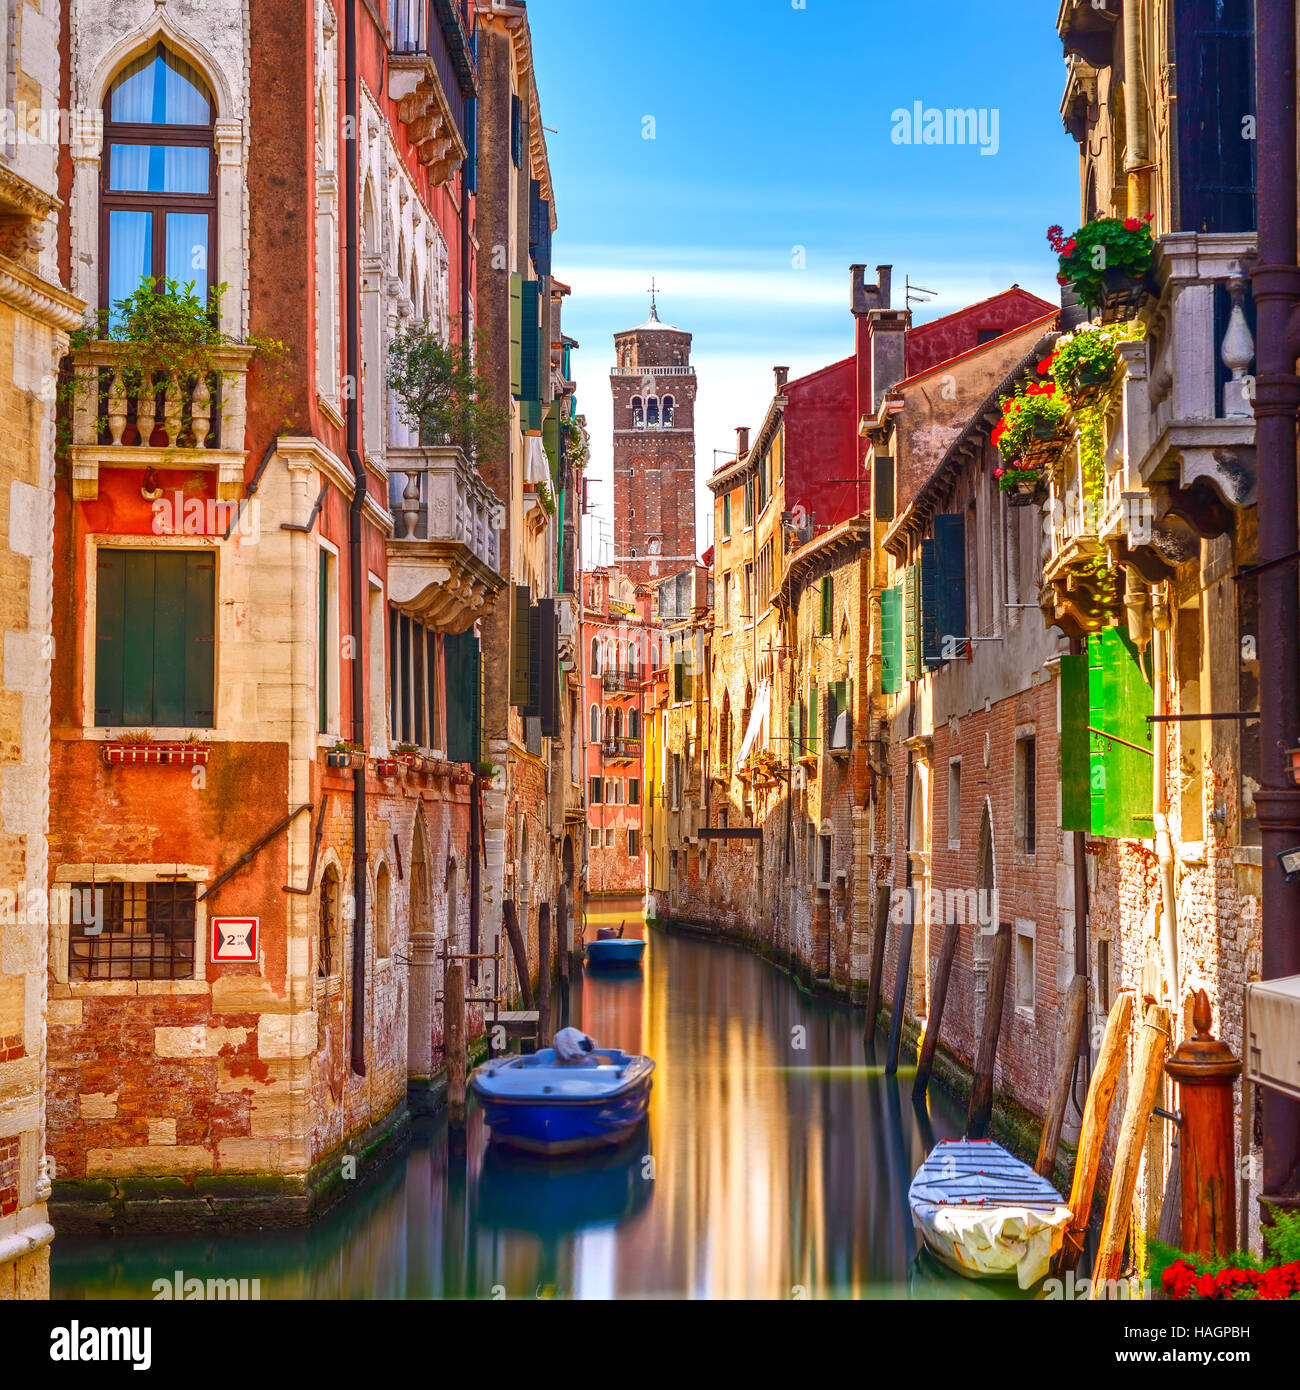 Venice cityscape, narrow water canal, campanile church on background and traditional buildings. Italy, Europe. Stock Photo